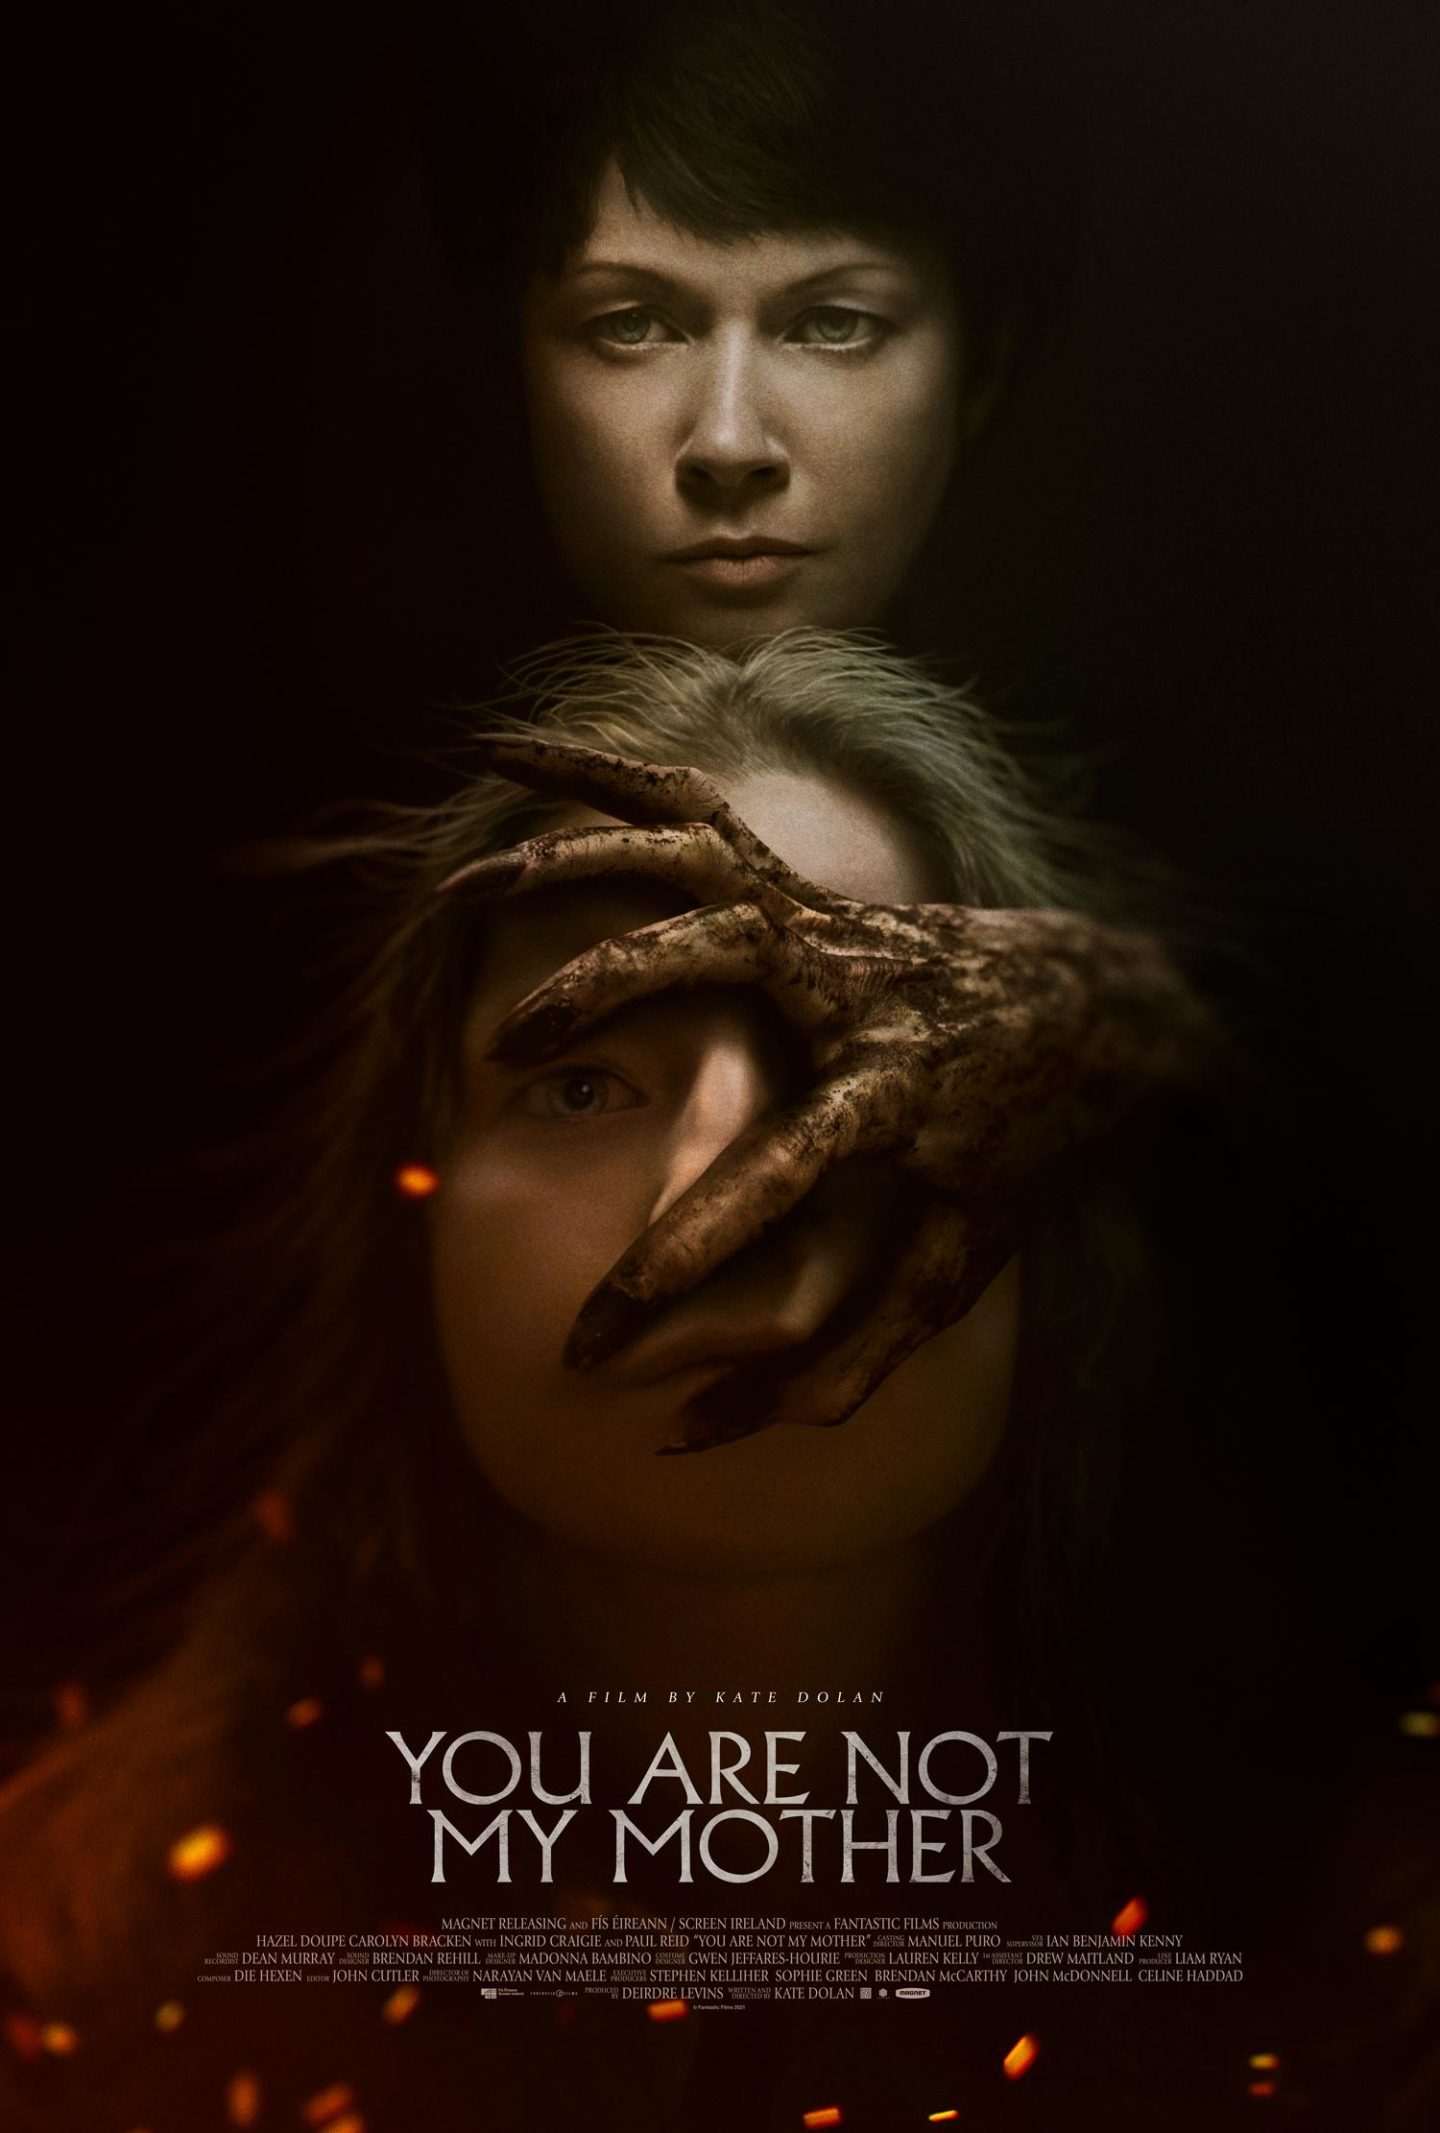 You Are Not My Mother - Teaser Poster